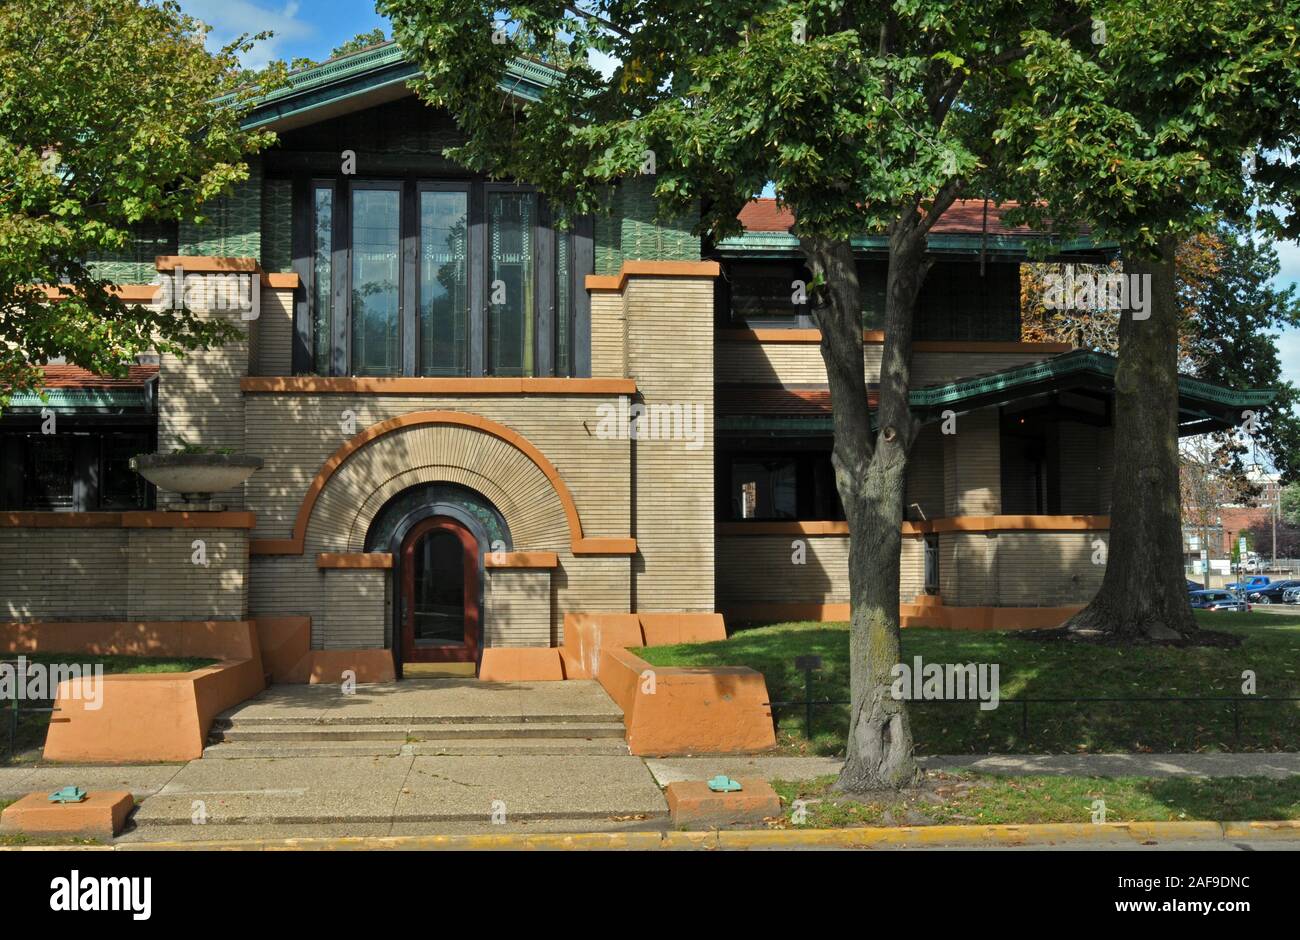 Designed by architect Frank Lloyd Wright in 1902 in the Prairie style, the Dana–Thomas House in Springfield, IL is open for public tours. Stock Photo